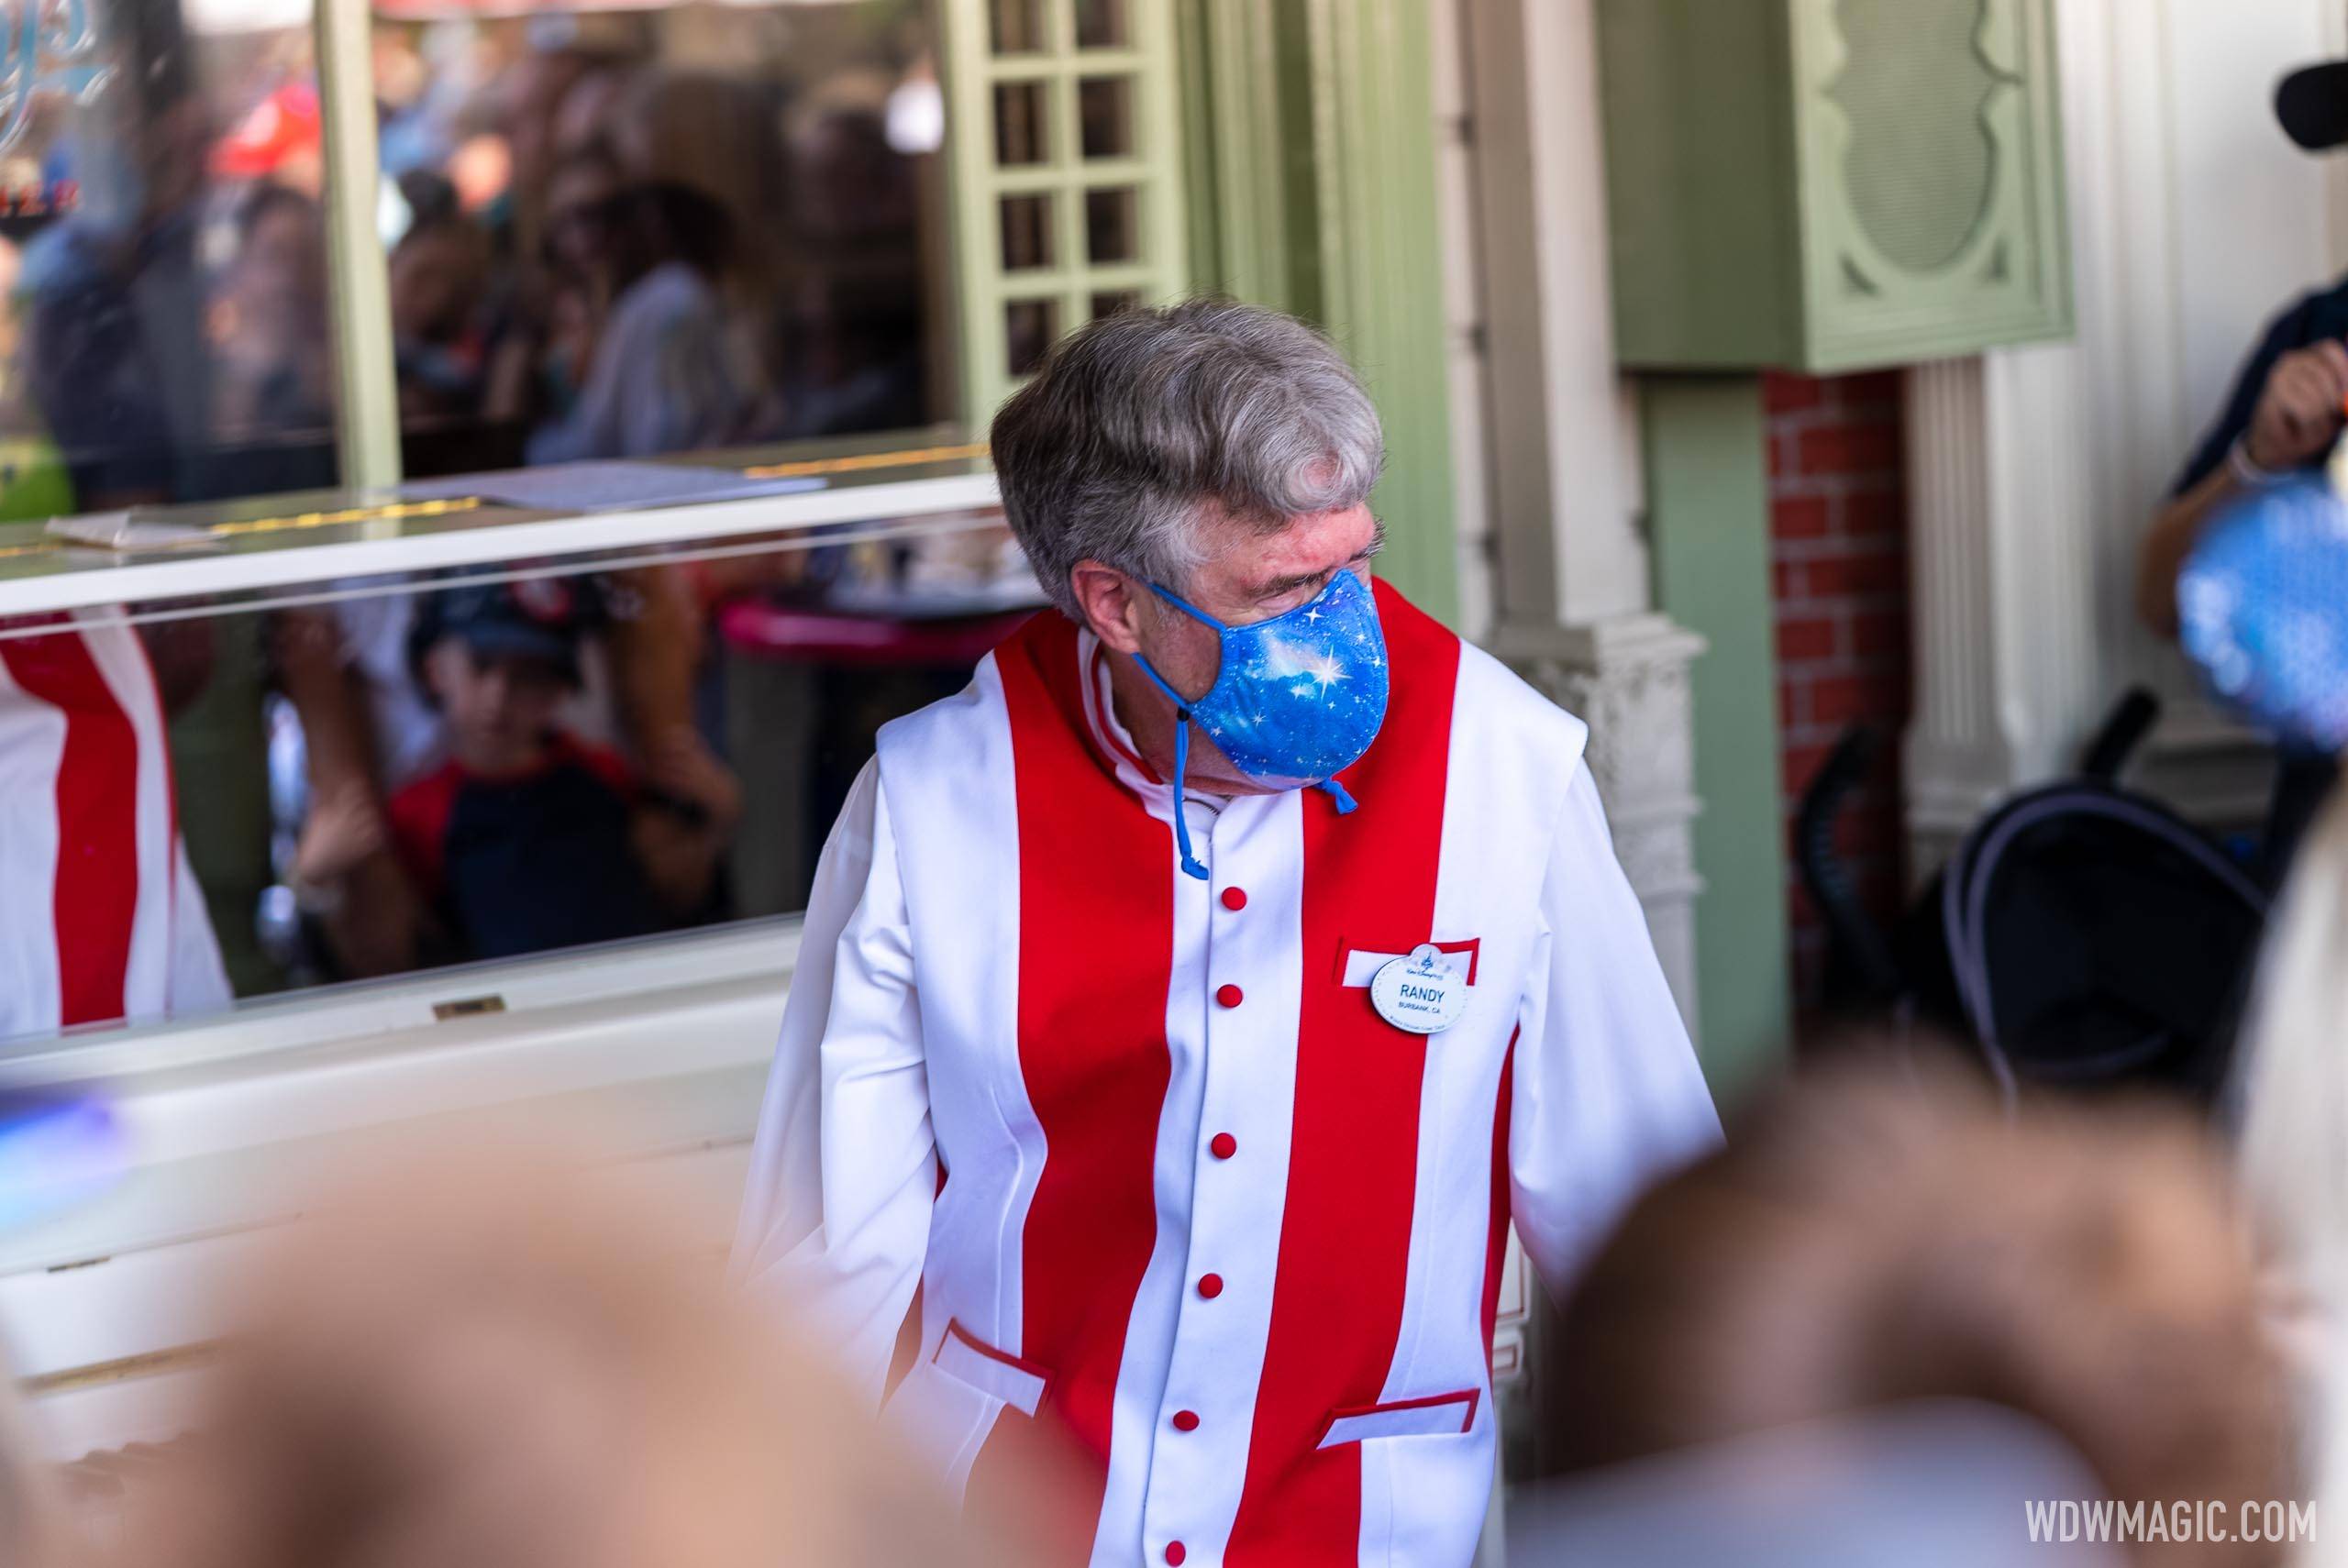 Magic Kingdom's Casey's Corner pianist returns with a special guest